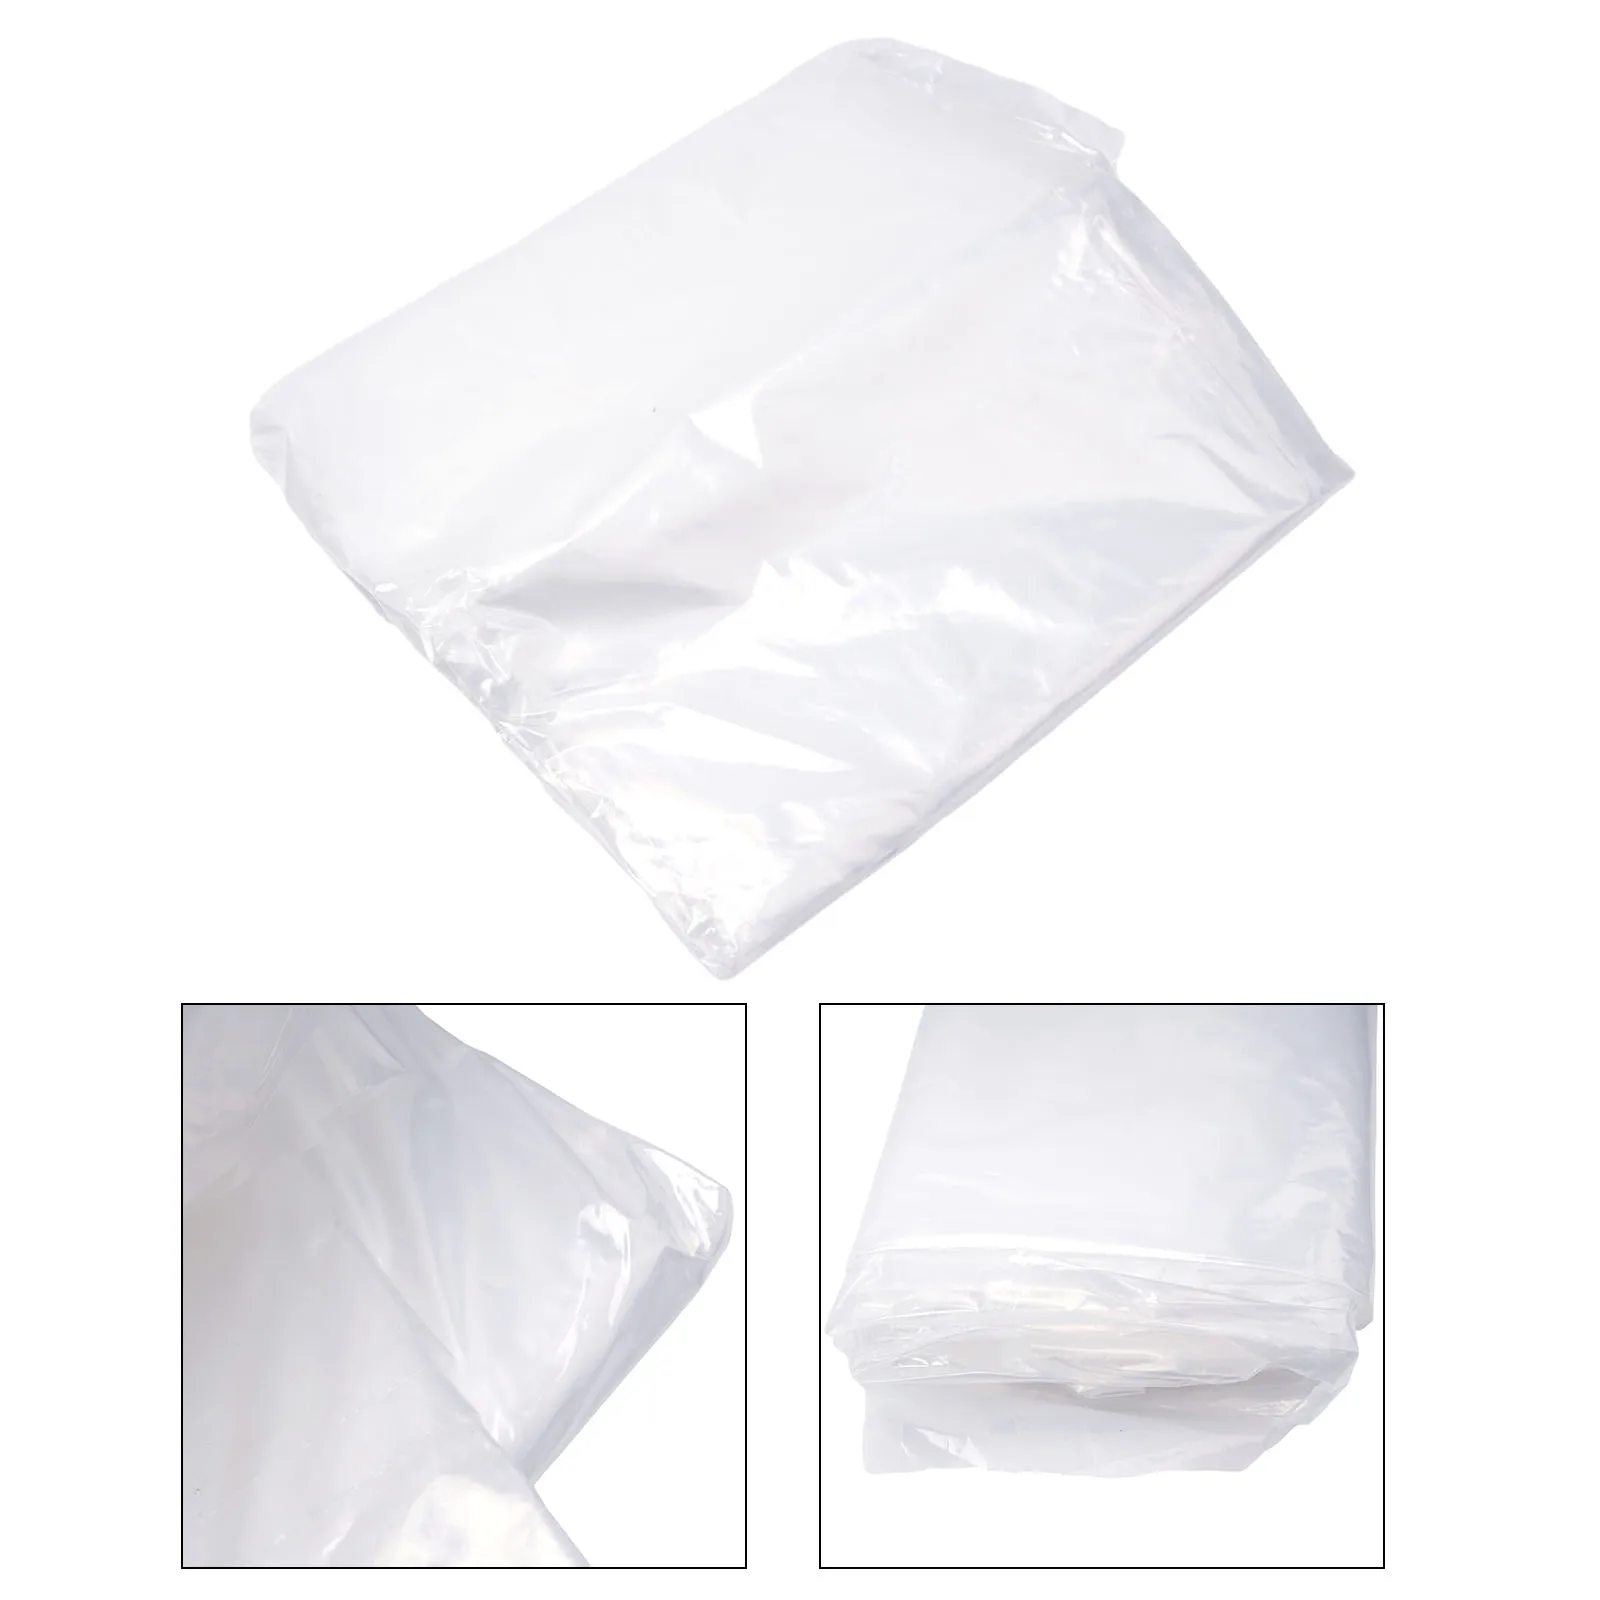 

1pcs Durable Greenhouse Film Garden Cover Waterproof 0.04mm Cold Protection DIY Foldable PE PVC Protect Plants